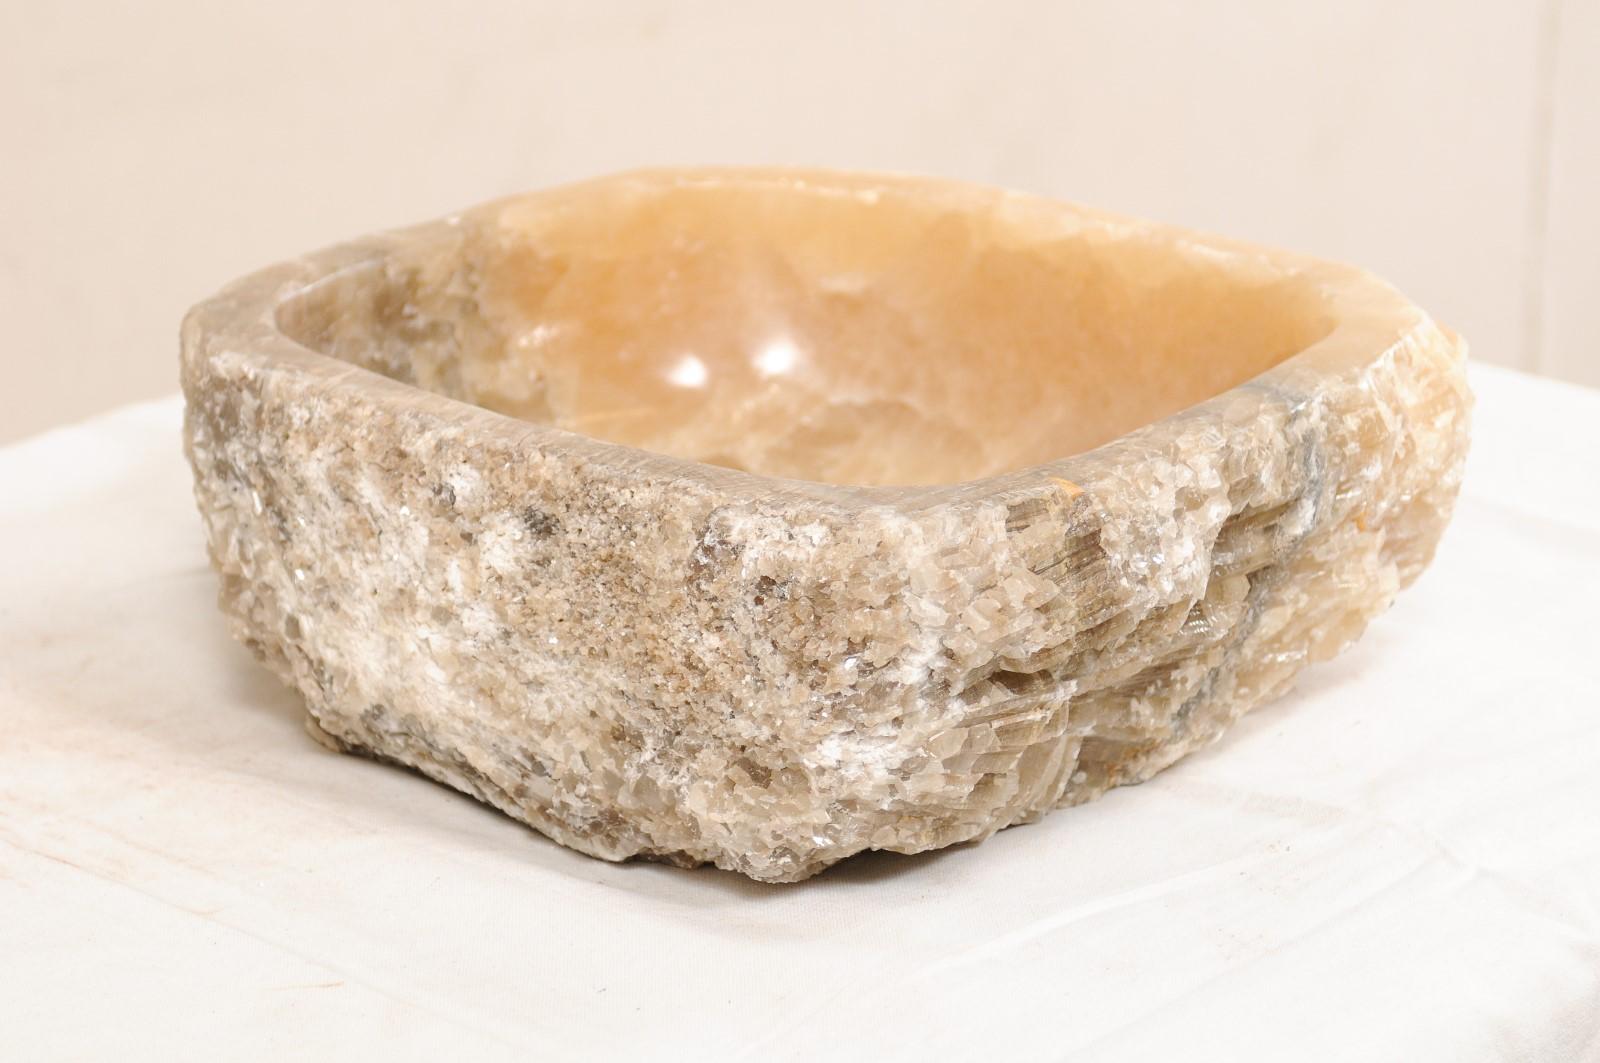 Contemporary Onyx Sink Basin with Two-Toned Coloration and Live Edge